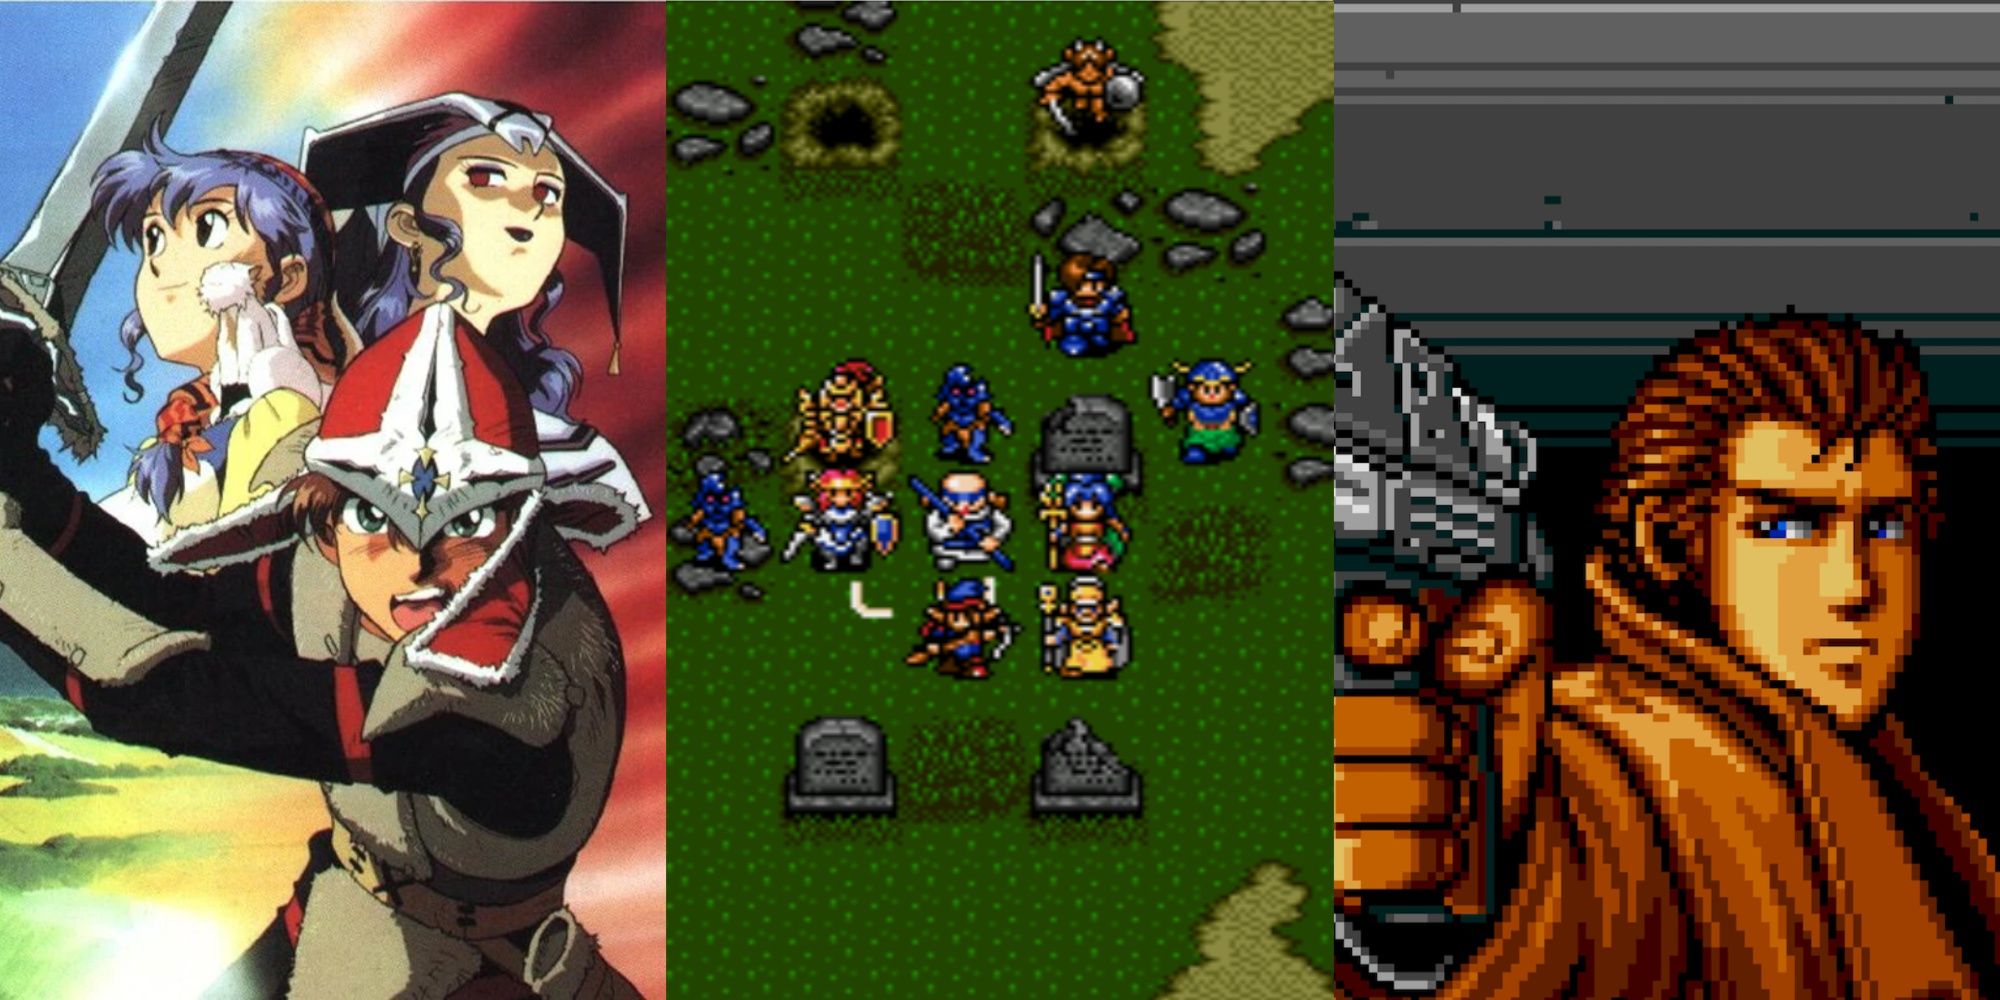 Lunar: The Silver Star characters ready to fight, Shining Force CD characters on the map screen, and Snatcher points a gun